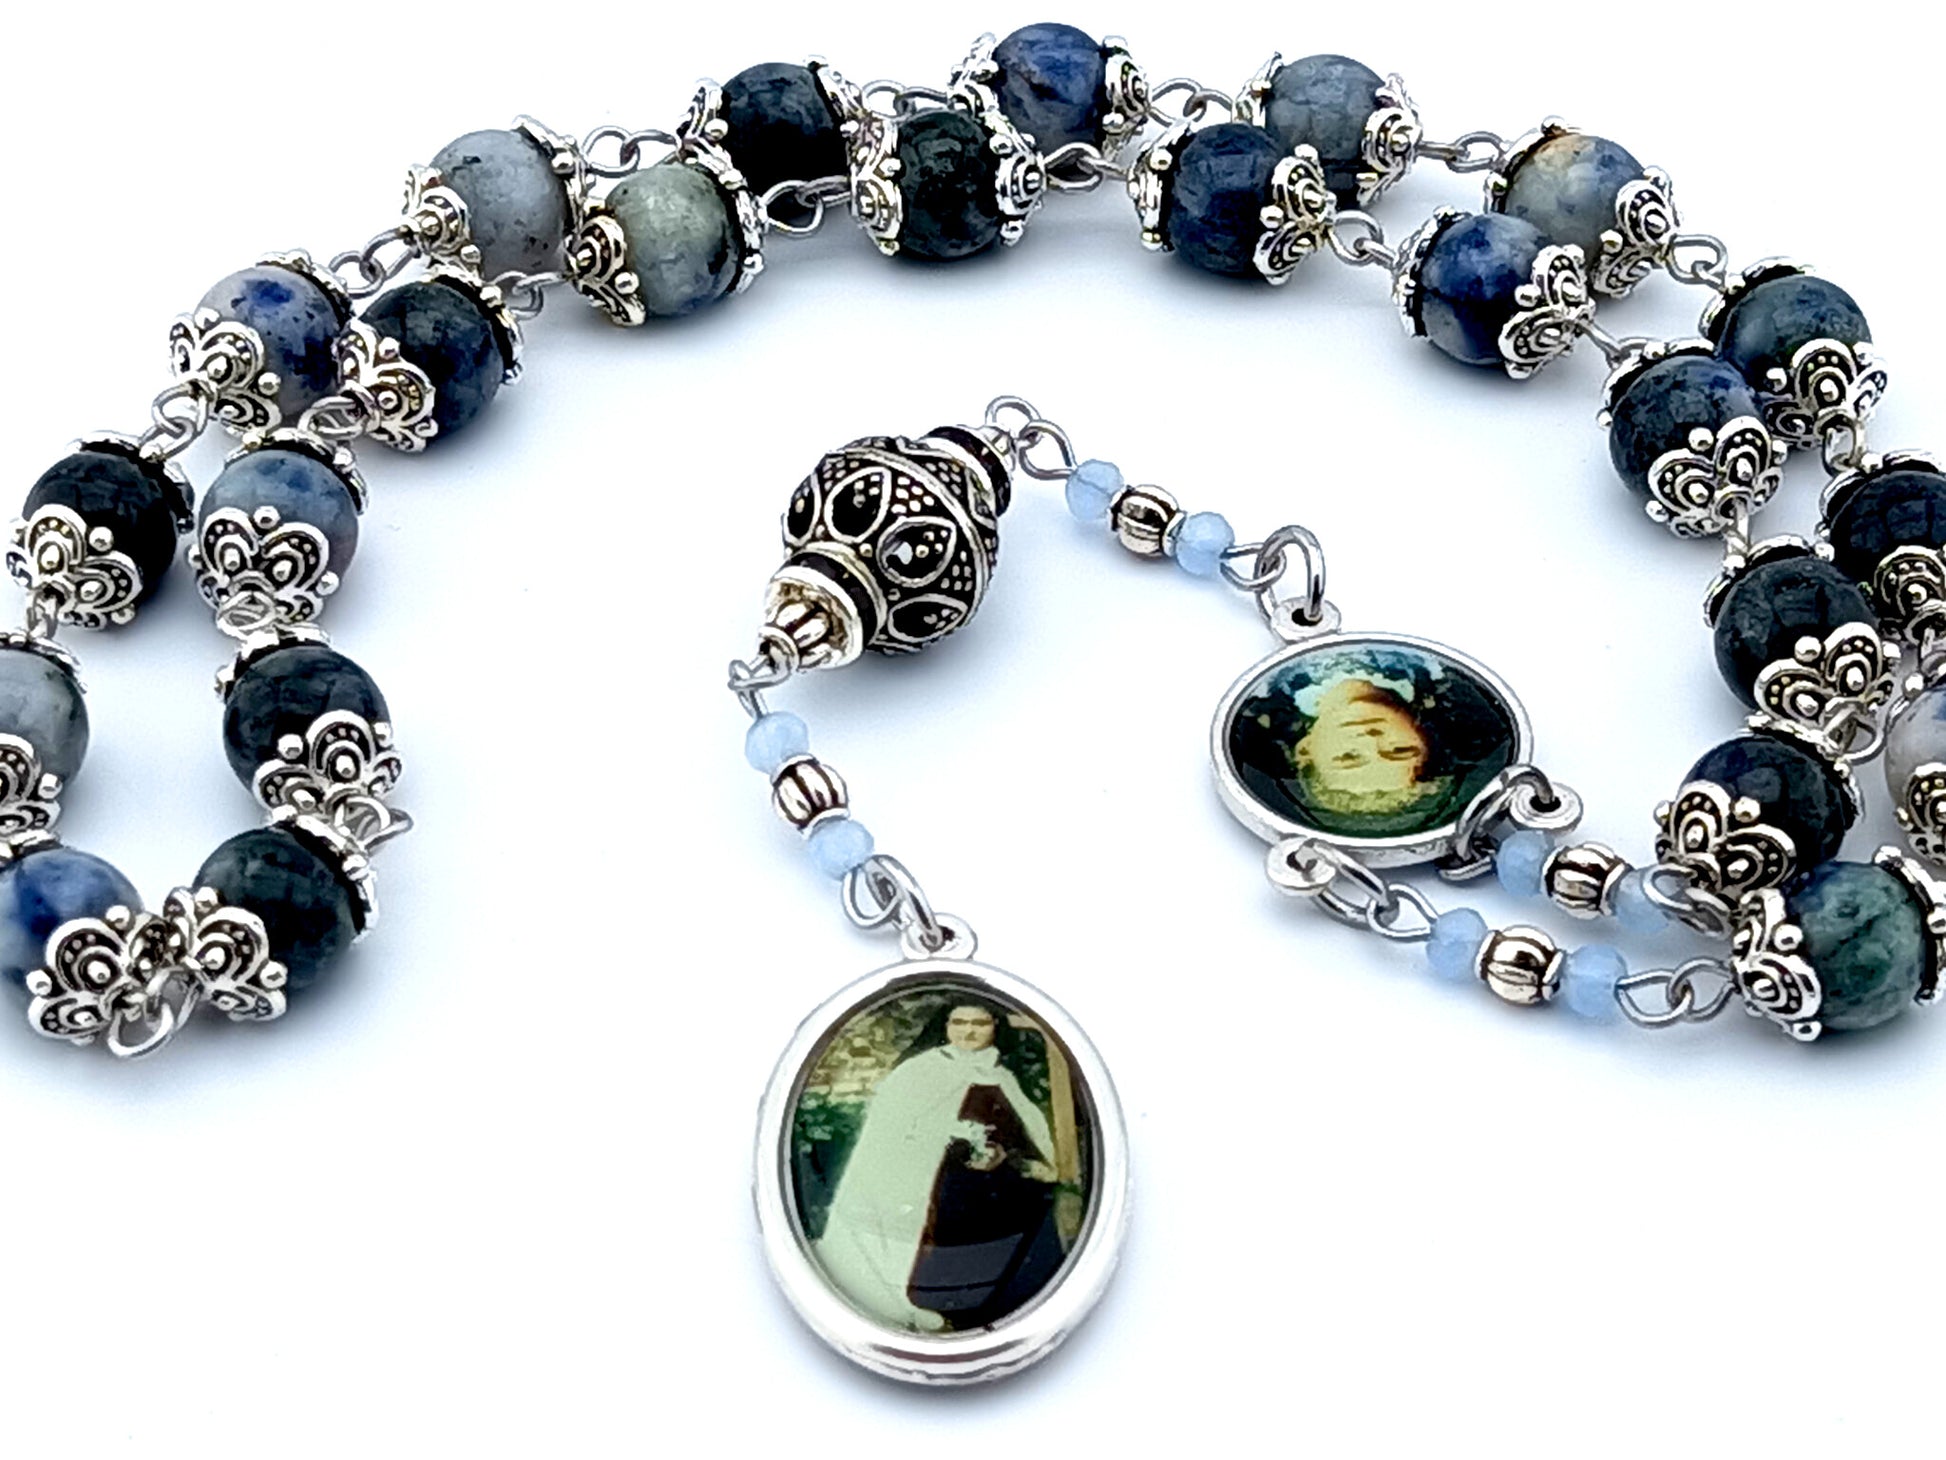 Saint Therese of Lisieux unique rosary beads gemstone prayer chaplet with Guardian Angel picture medal and Saint Therese the little flower picture medal.